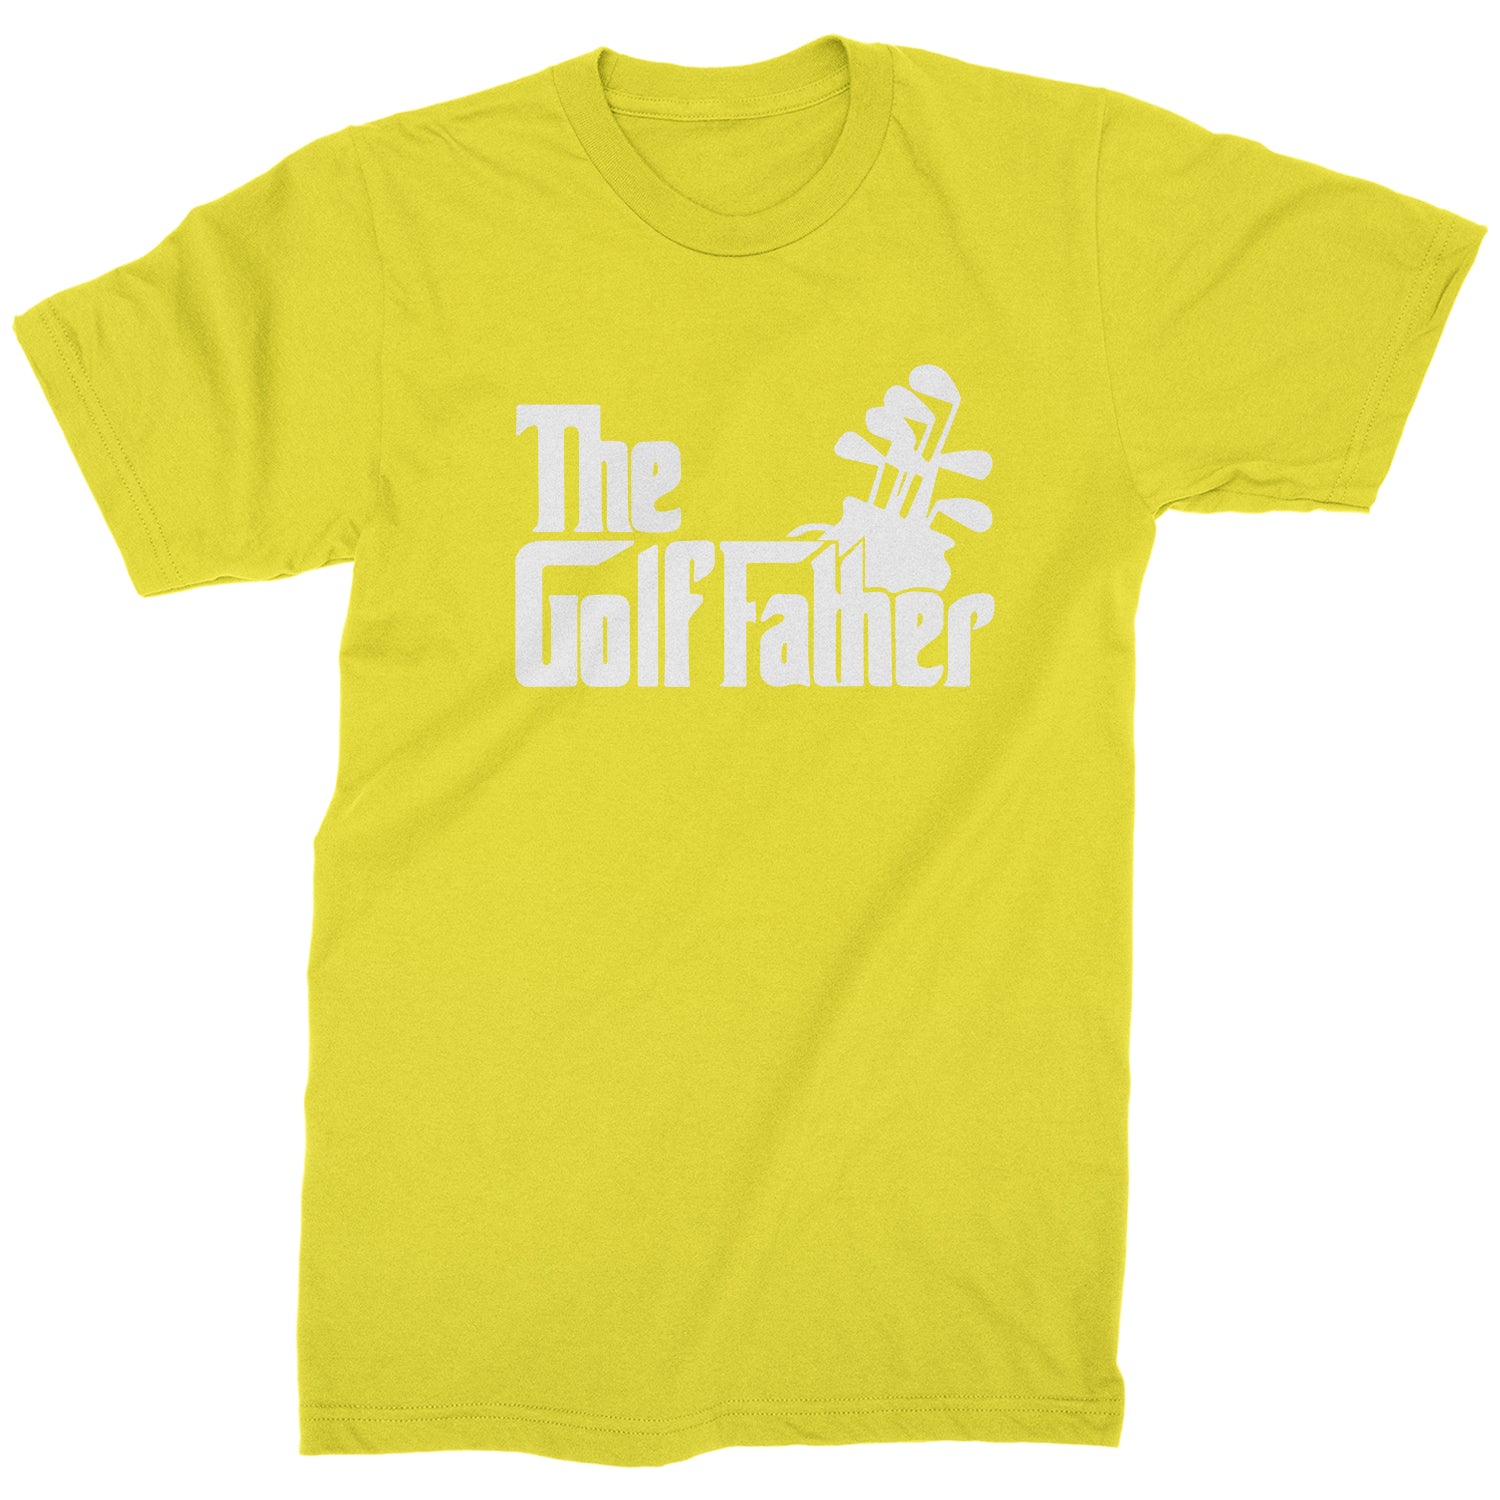 The Golf Father Golfing Dad Mens T-shirt #expressiontees by Expression Tees